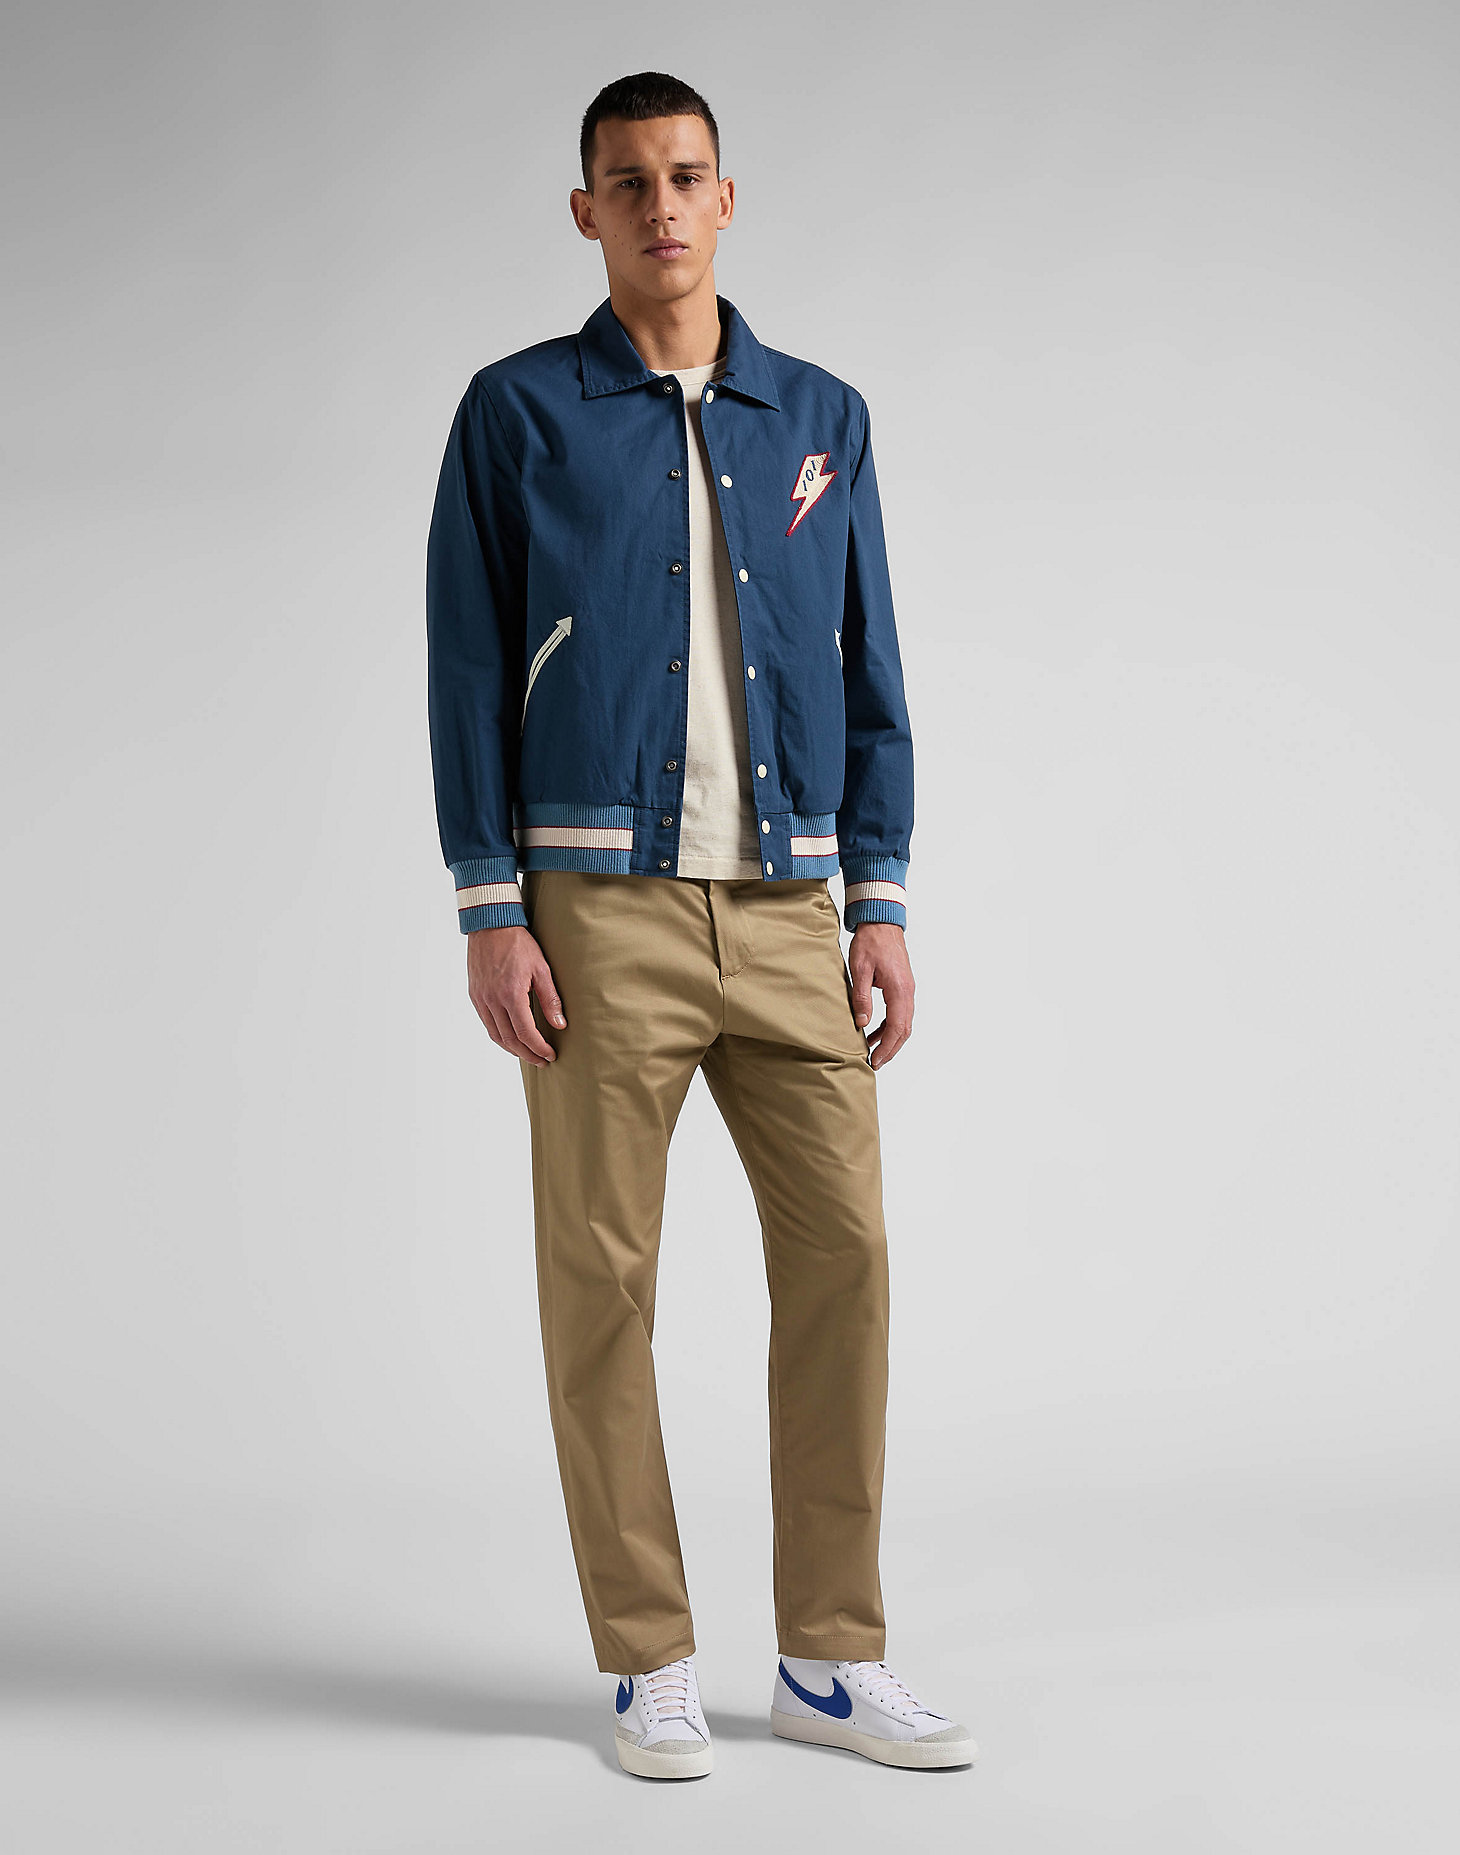 101 Bomber Jacket in Ensign Blue alternative view 1